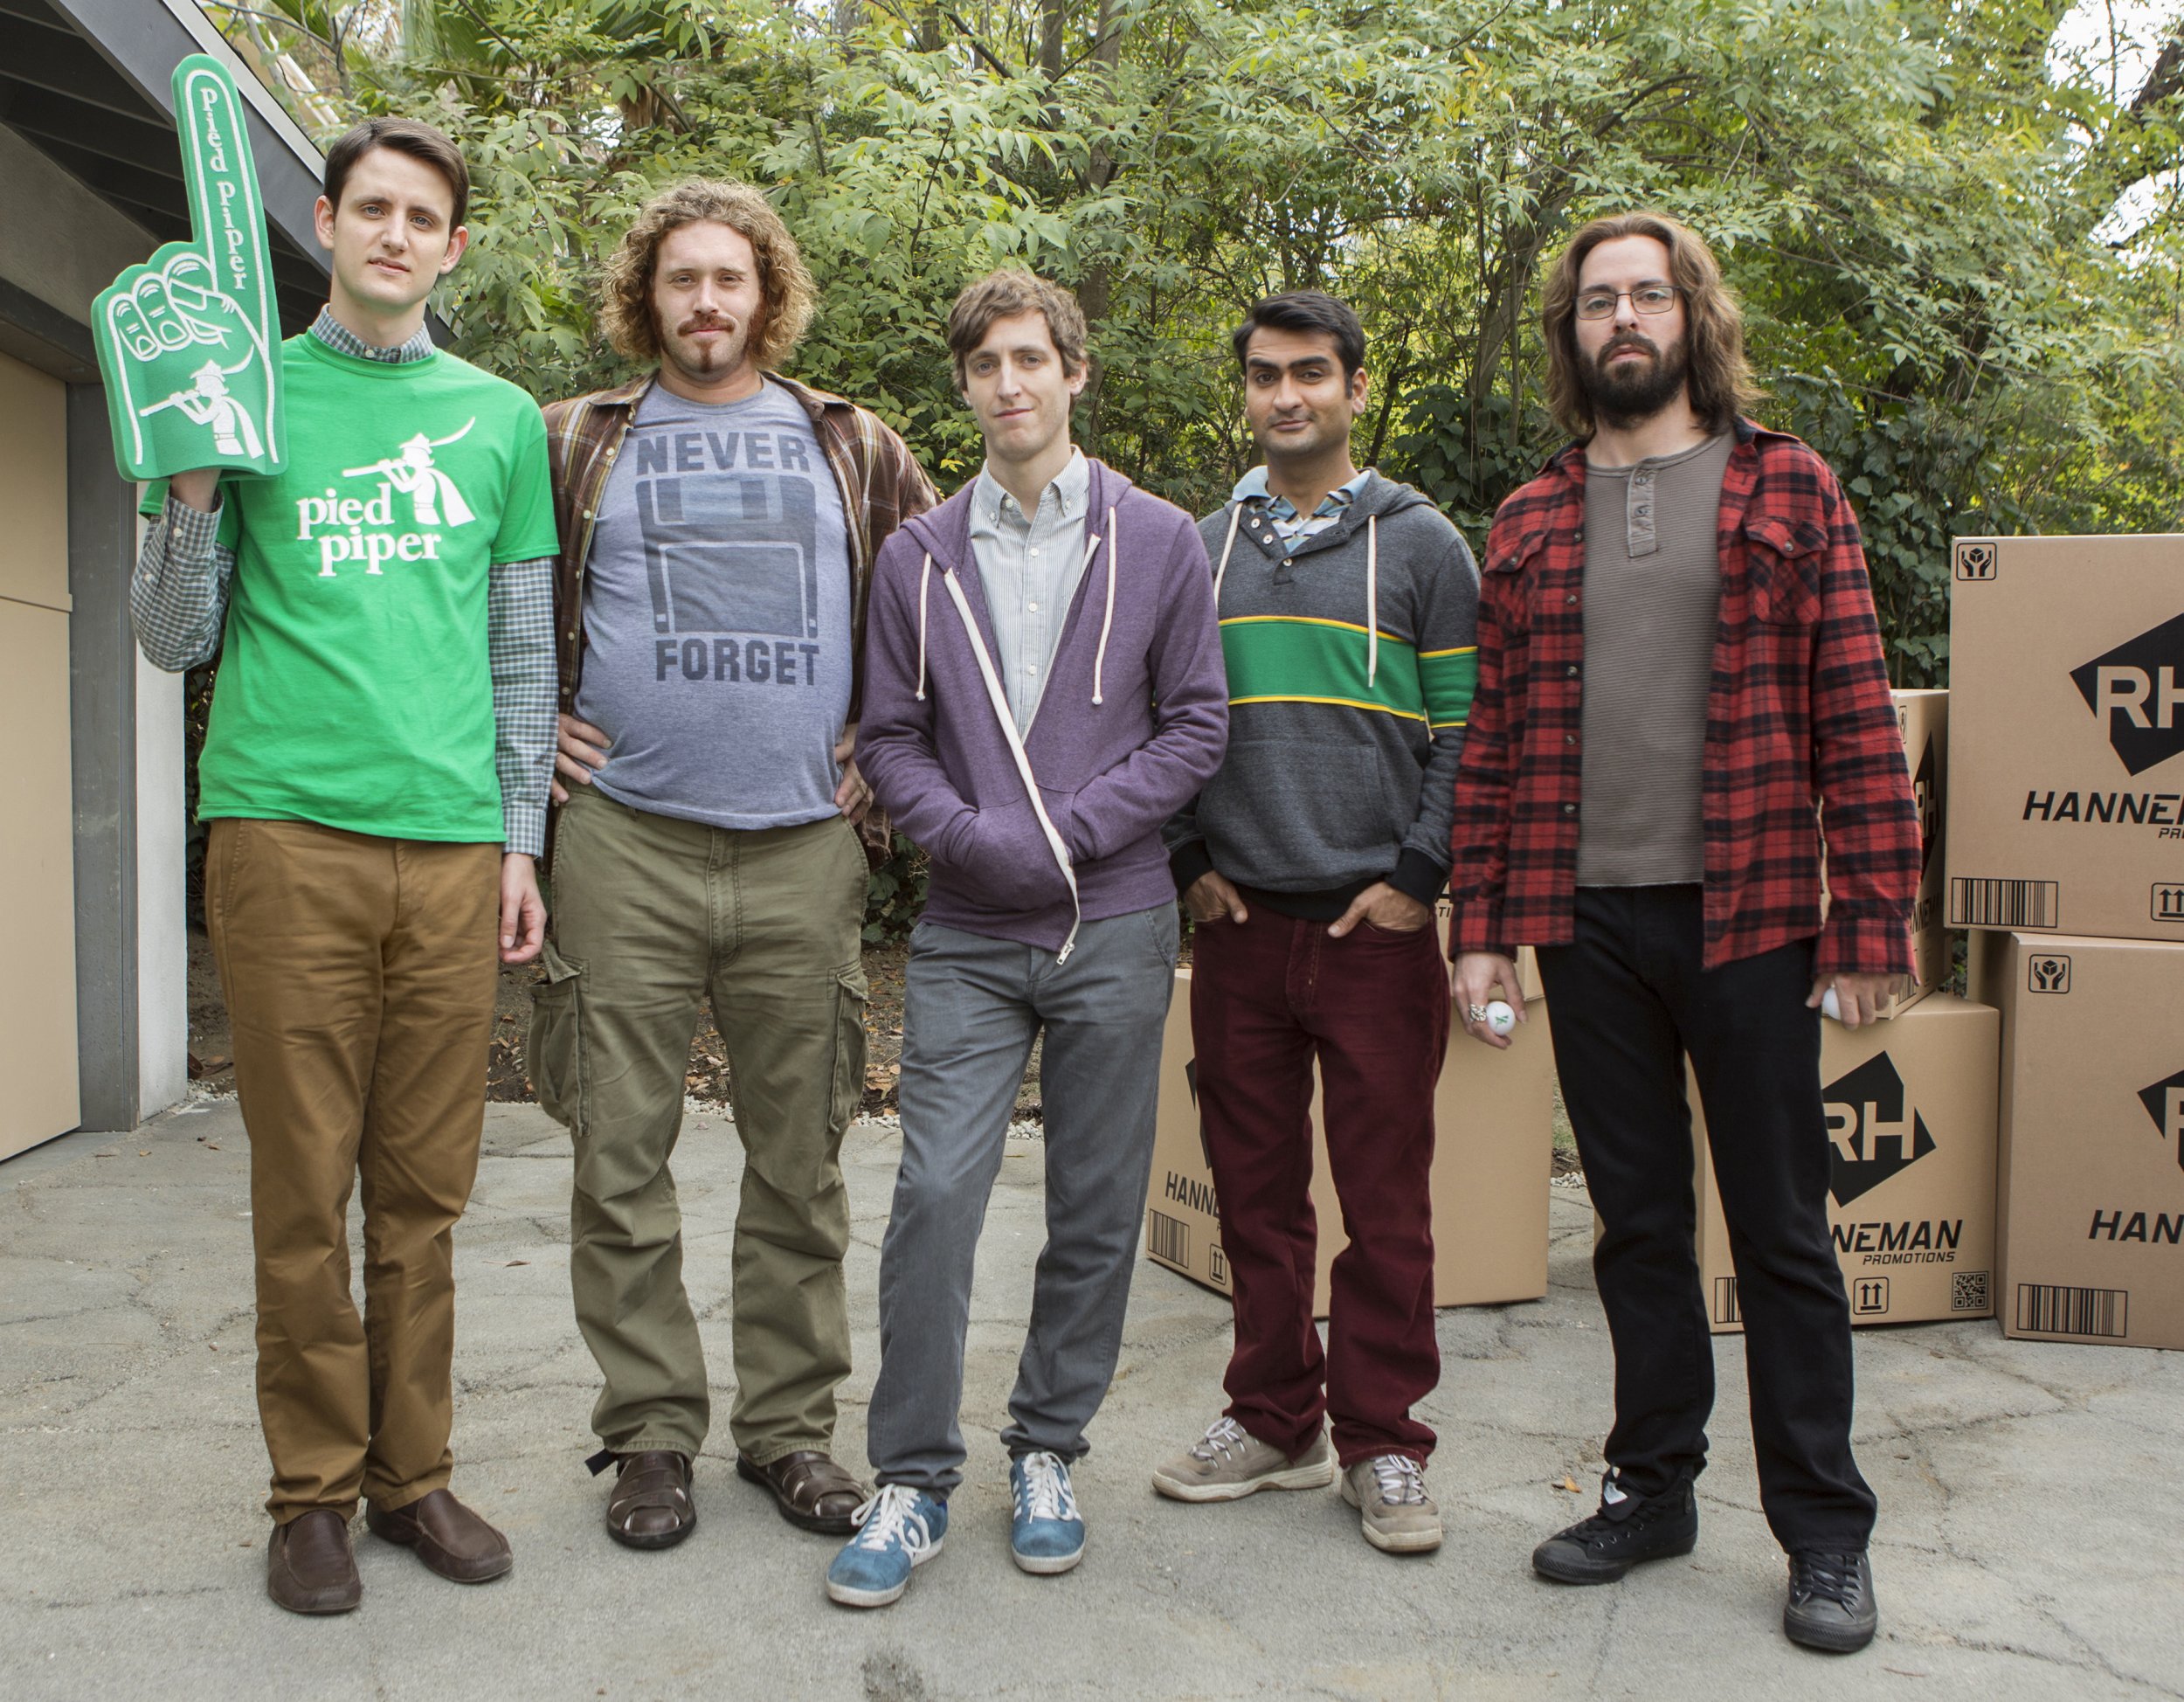 HBO's 'Silicon Valley' Got One Thing Right Tech Companies Hire Models